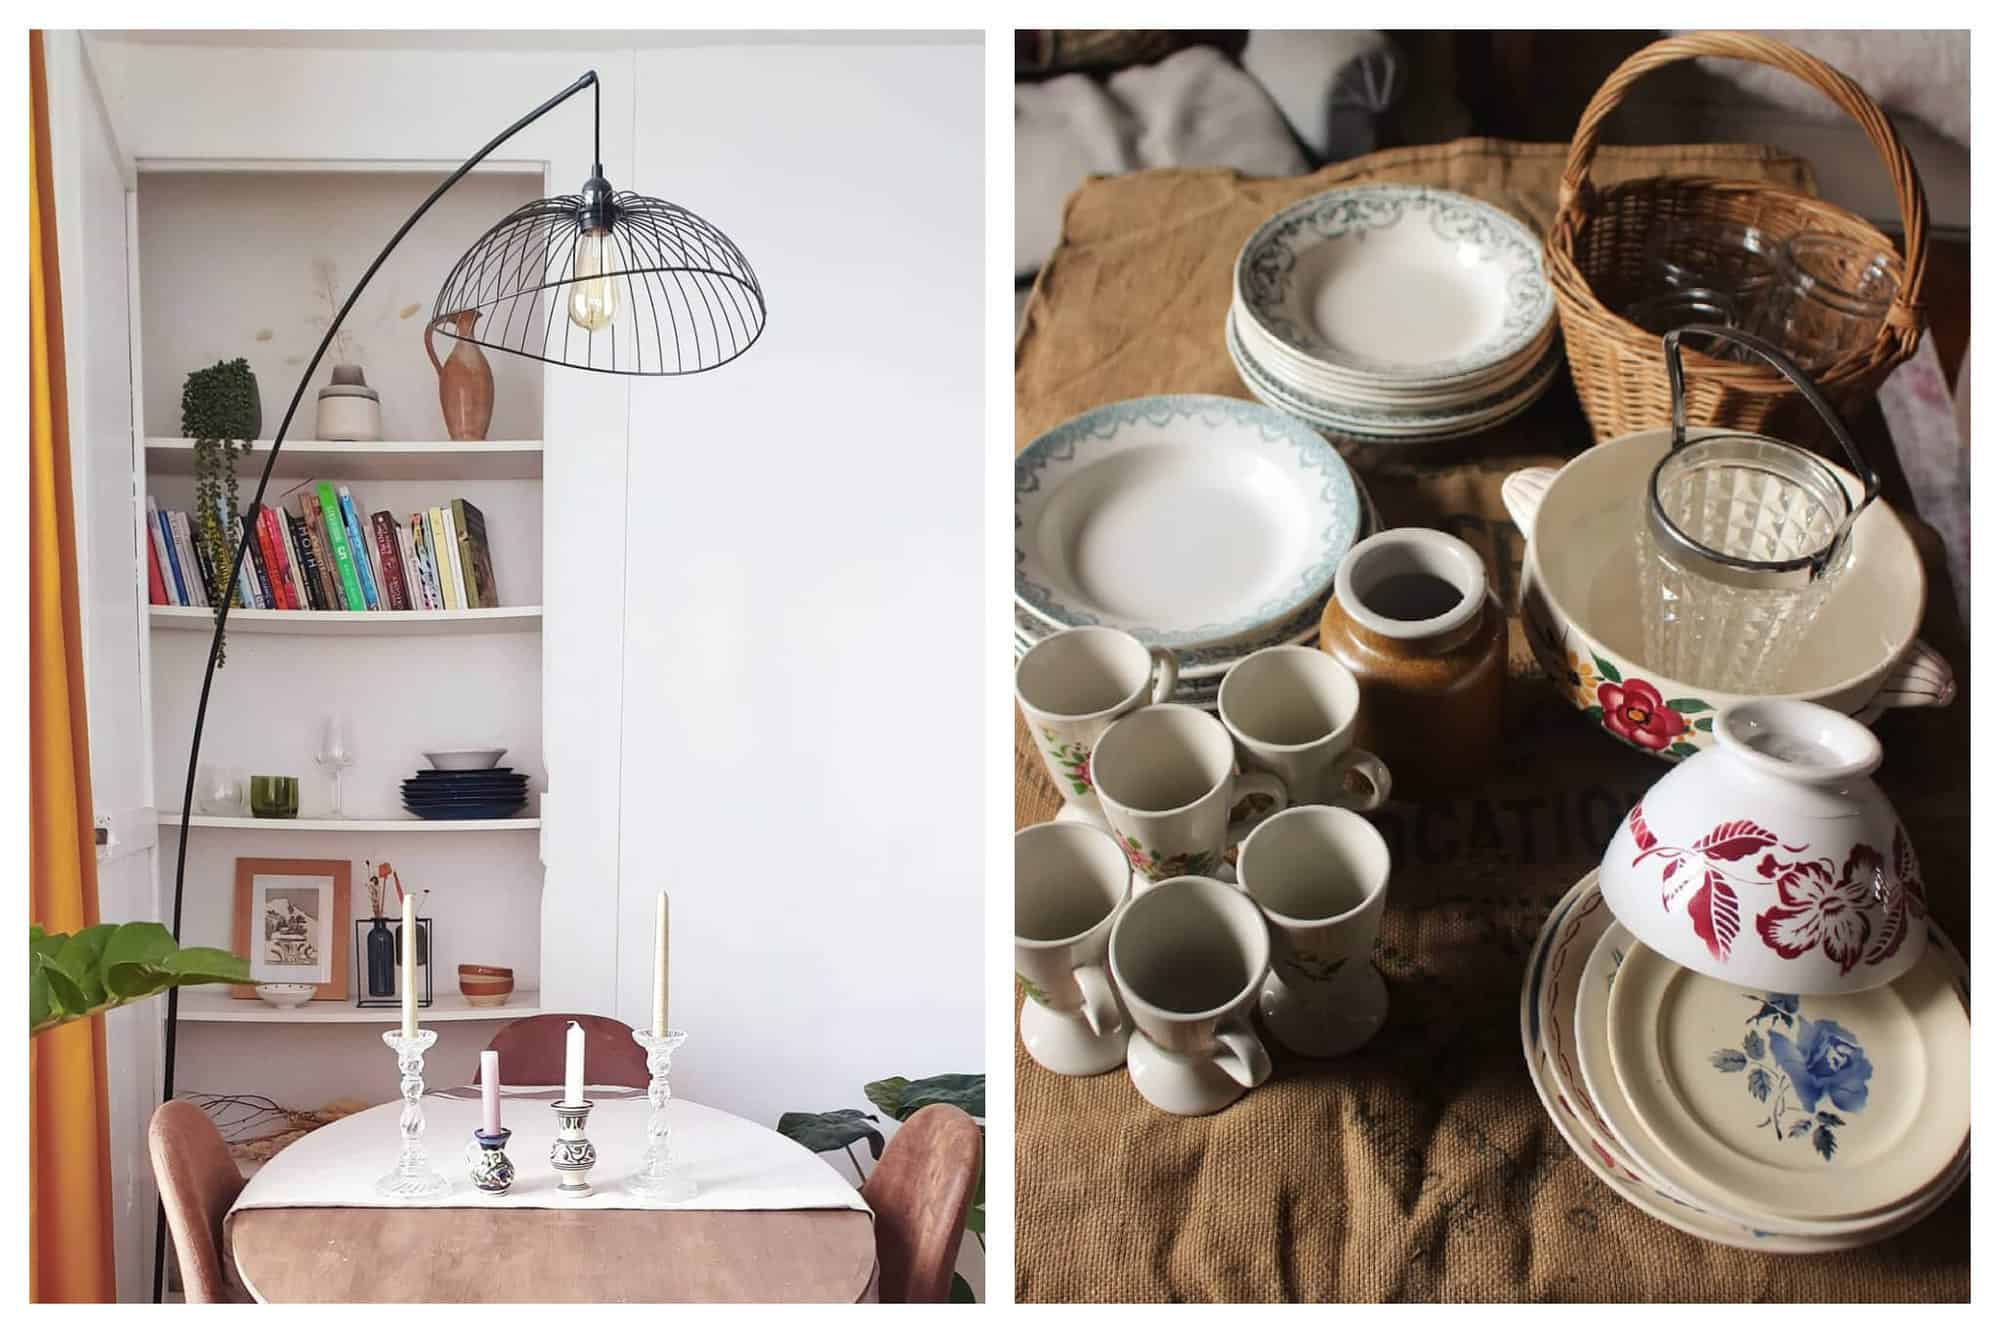 Left: The interior of a Parisian apartment is pictured. A dining table with candles and a bookshelf are pictured, as well as a tall, thin standing light fixture. Right: A collection of unique vintage dishware is pictured, including mugs, plates, and a bowl.